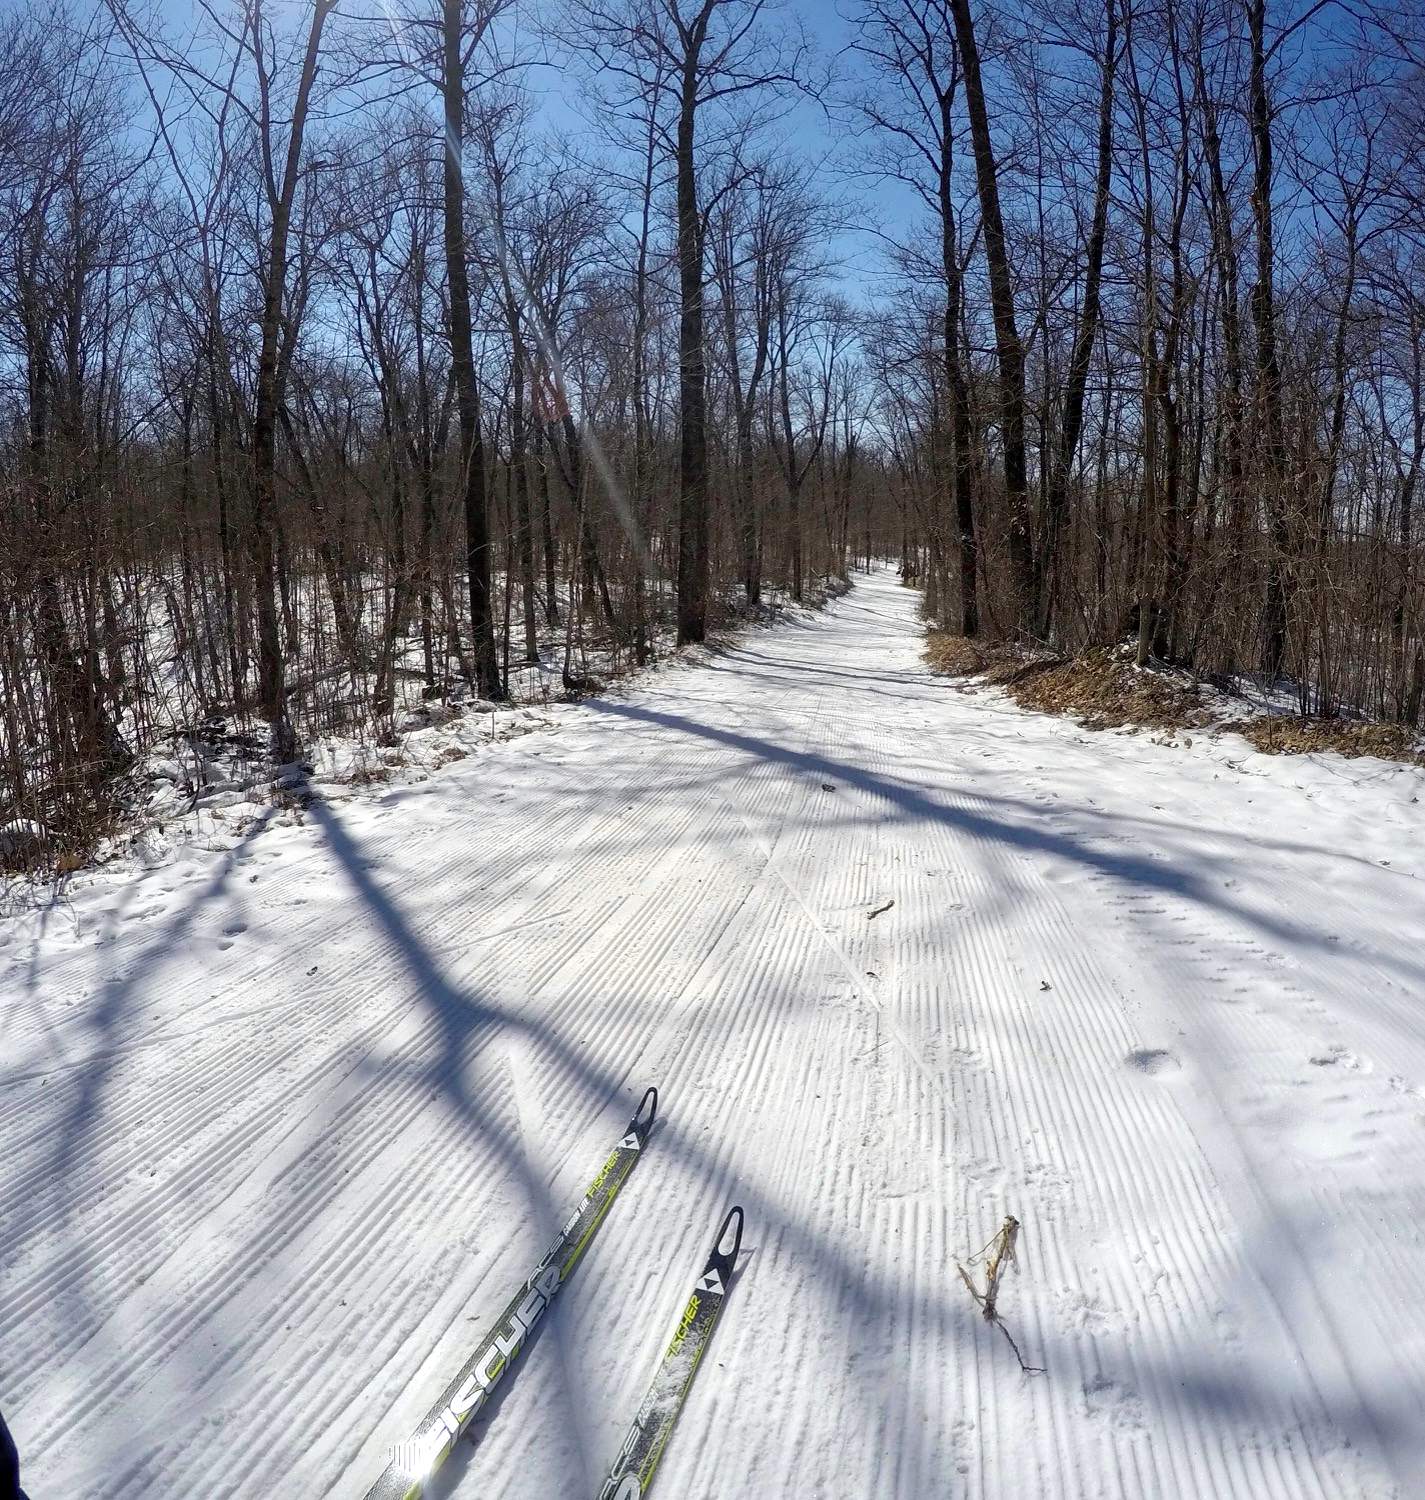 Dusting of new snow groomed on a 2.5km loop making for skiable conditions. March 13th, 2017.